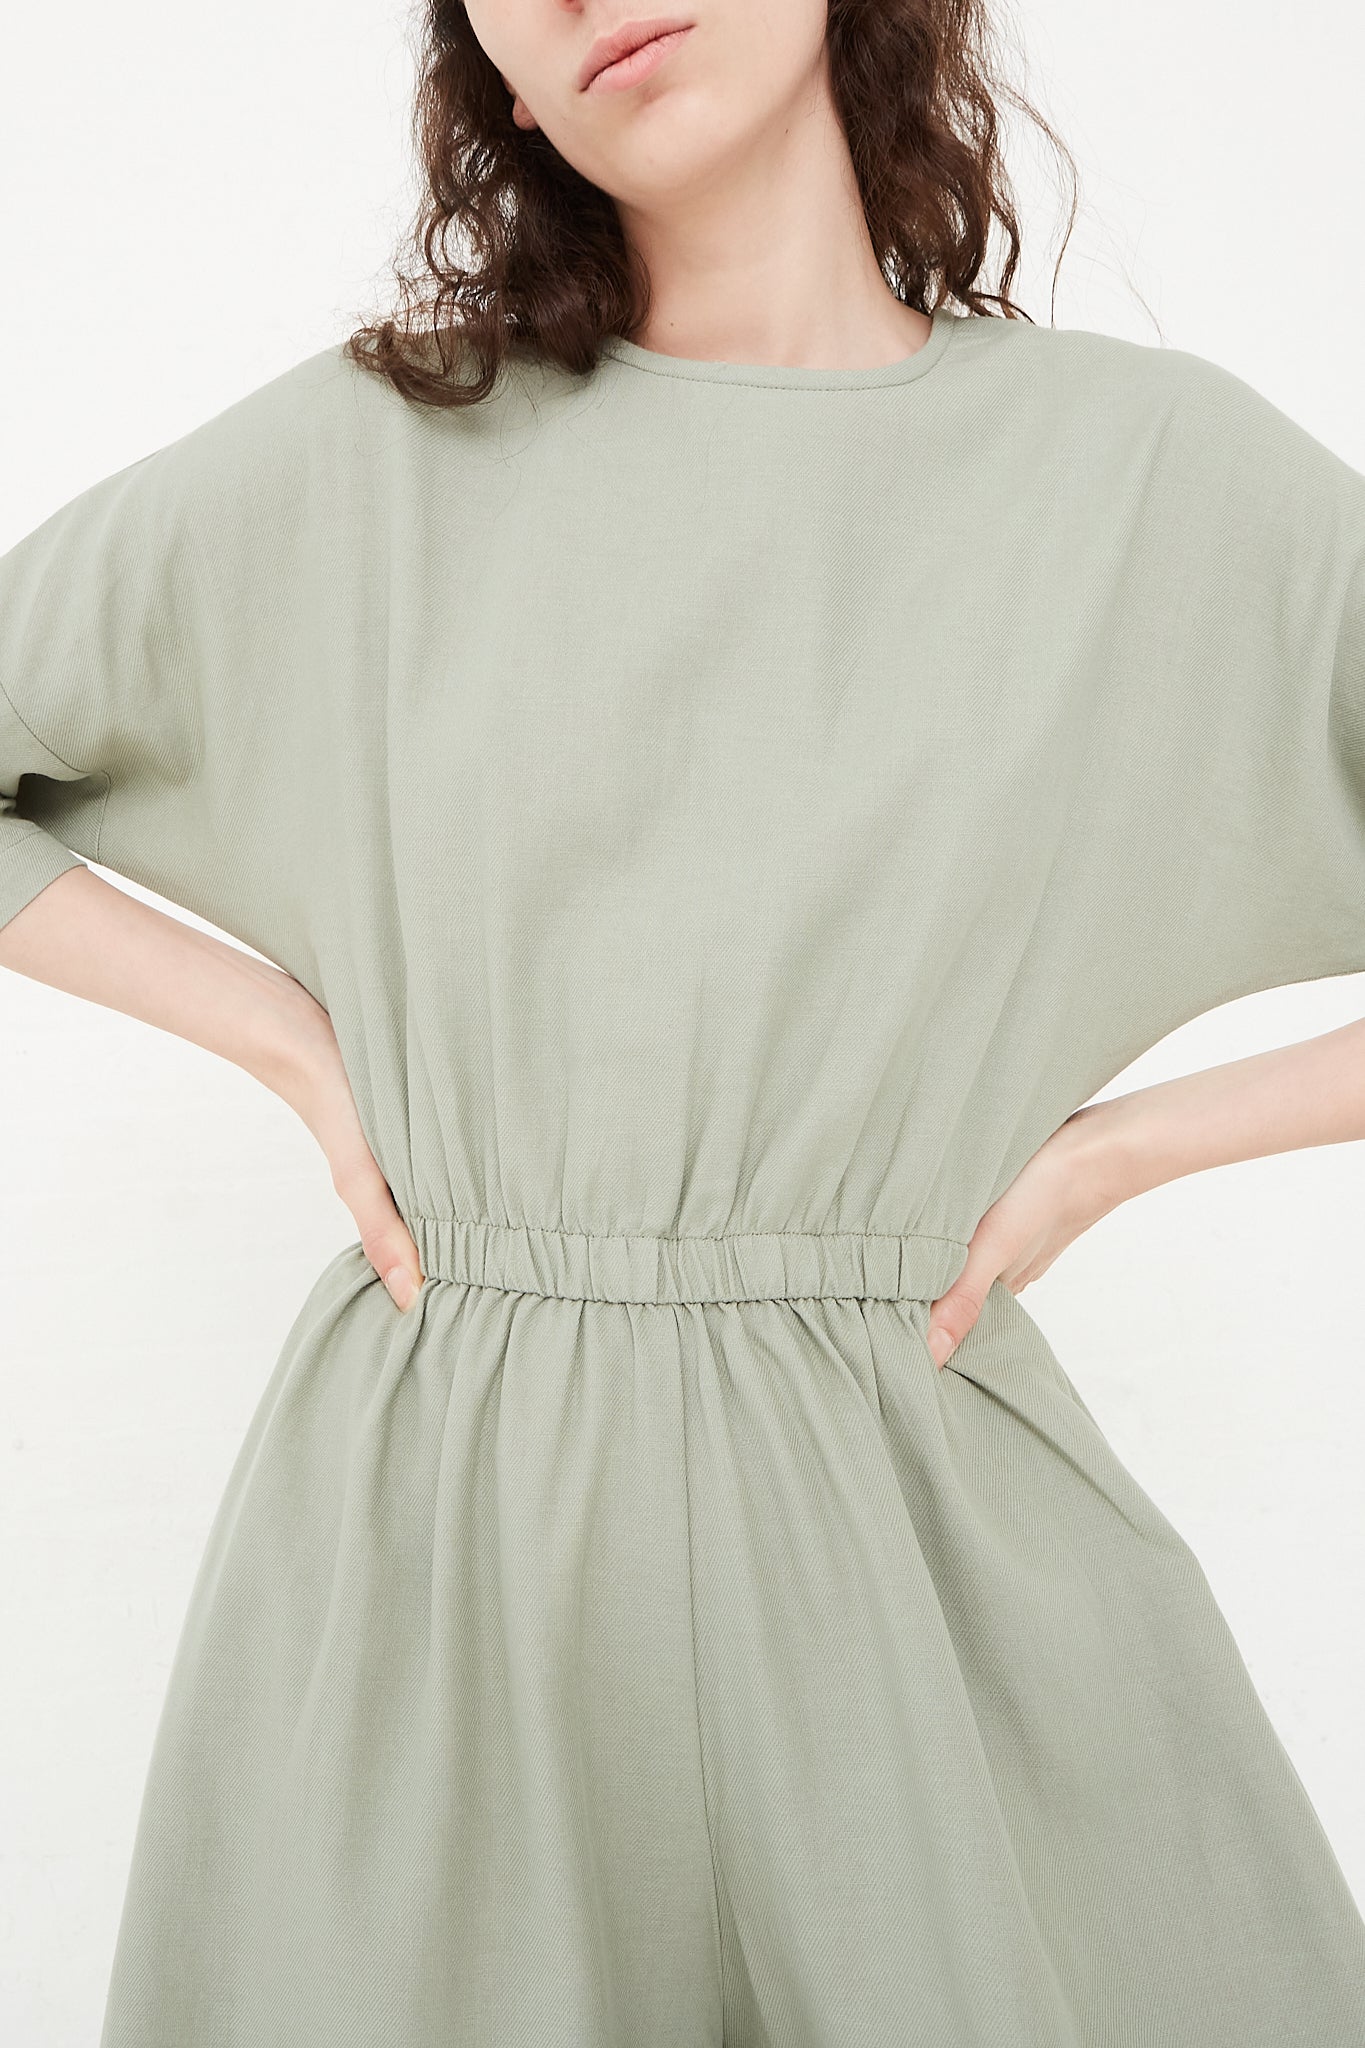 Cotton Twill Wide Culotte Jumpsuit in Agave by Black Crane for Oroboro Front Upclose